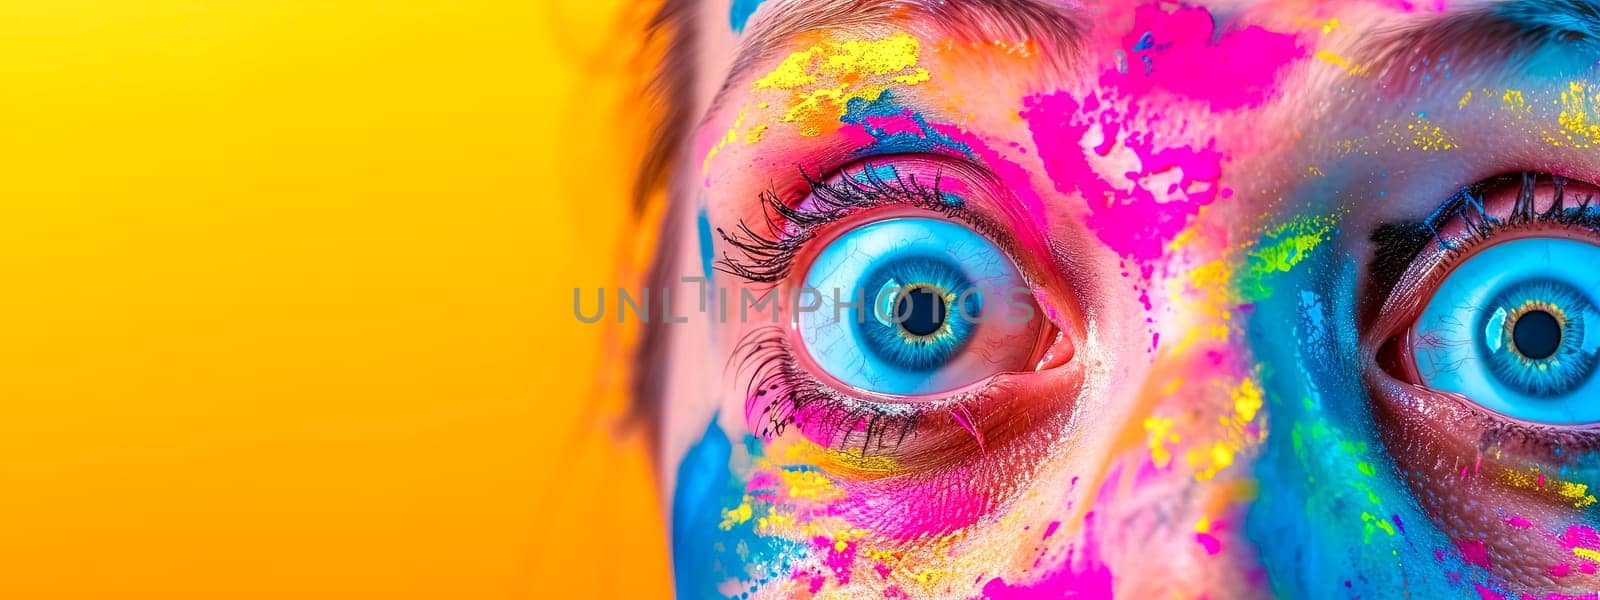 Striking Close-Up of Vibrant Eye Makeup and Colorful Face Paint on a Bright Yellow Background by Edophoto